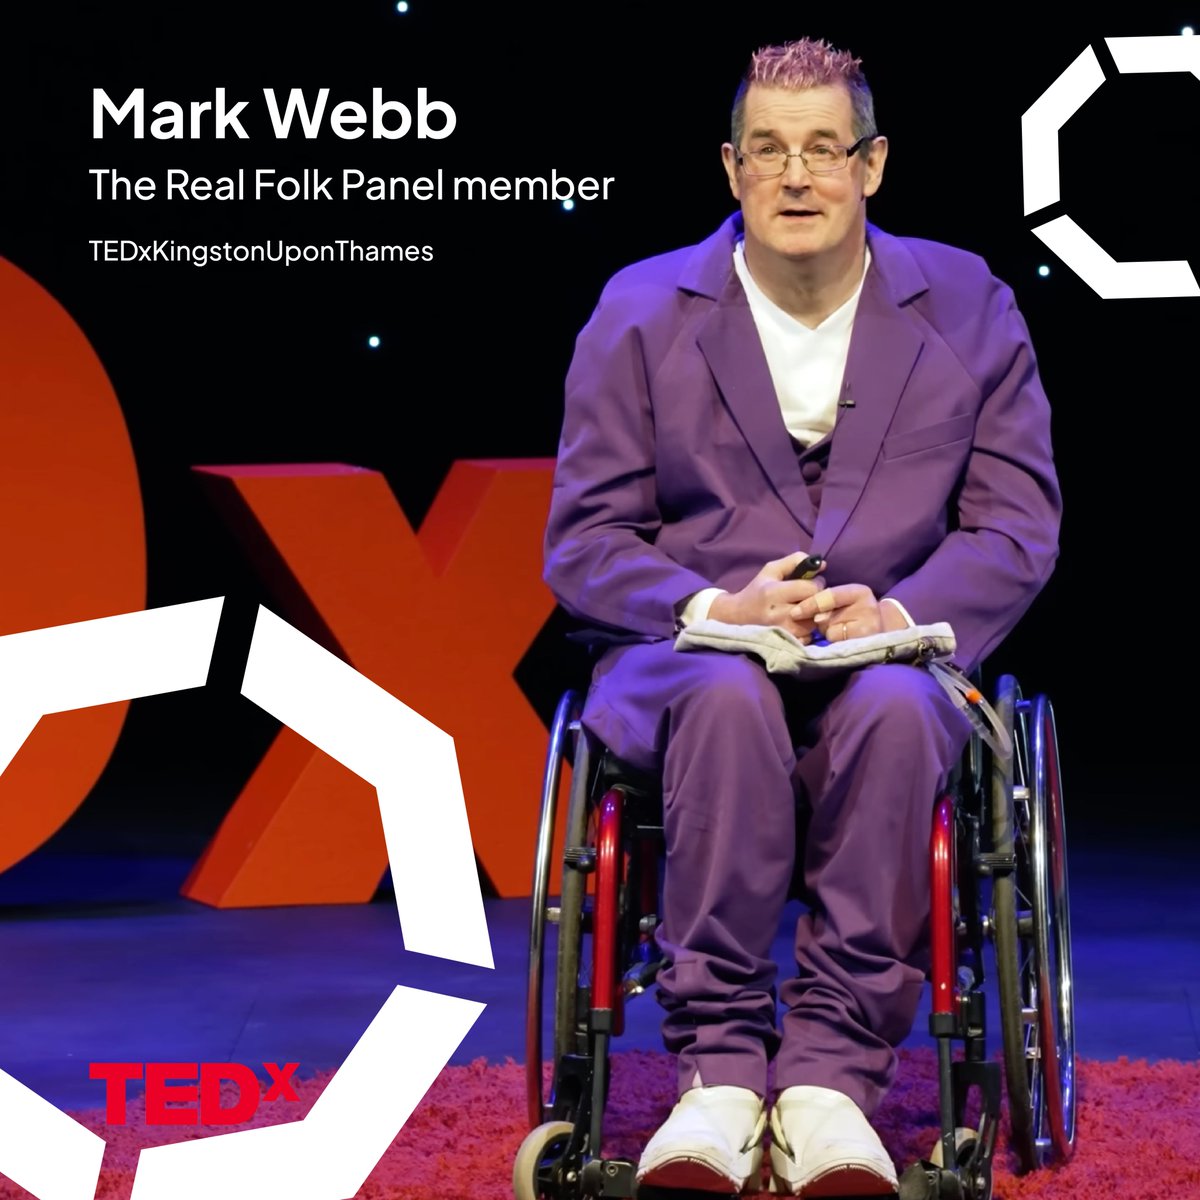 Last week, The Real Folk Panel member @MarkWebb_  spoke at @TEDxKingston about multiple sclerosis and the importance of friendship ❤️

Watch Mark's powerful talk on YouTube here - lnkd.in/geyERcFy 🔗 

#multiplesclerosisawareness #tedxkingstonuponthames #dei #creativecomms